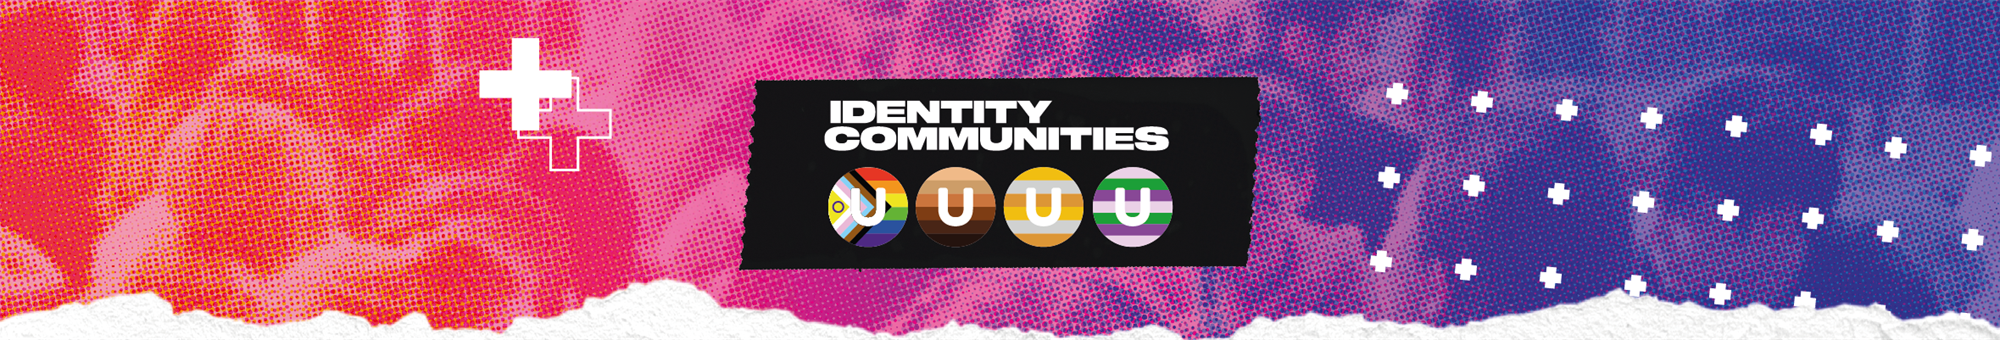 Join one (or more) of the Identity Communities on your campus, we're looking to appoint leaders too!